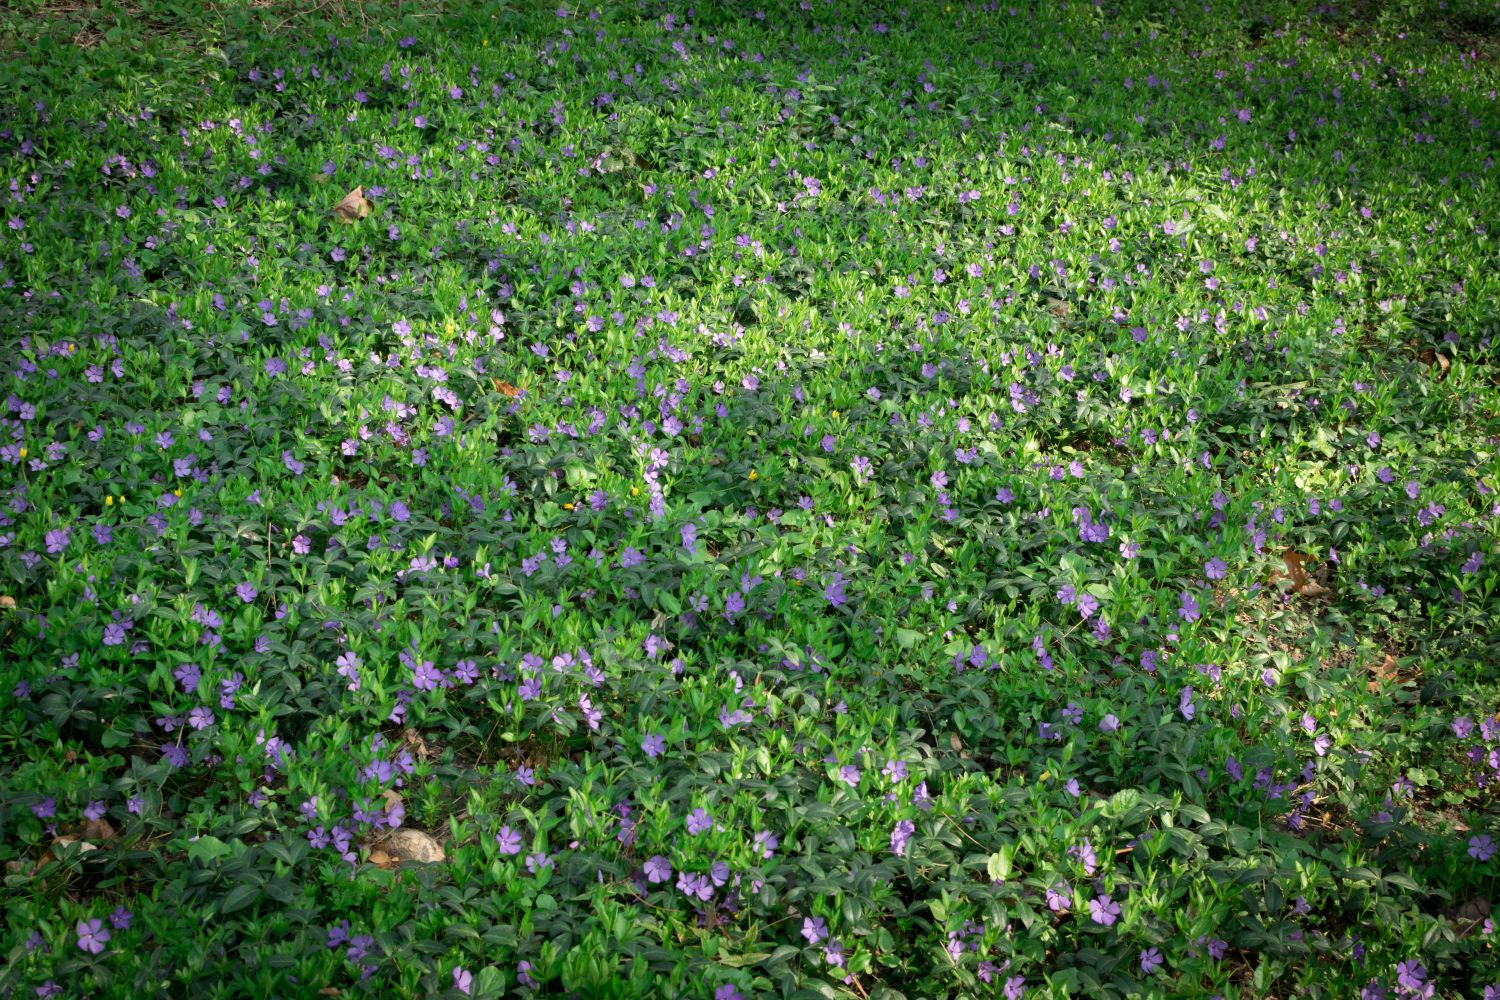 Colourful periwinkle ground cover